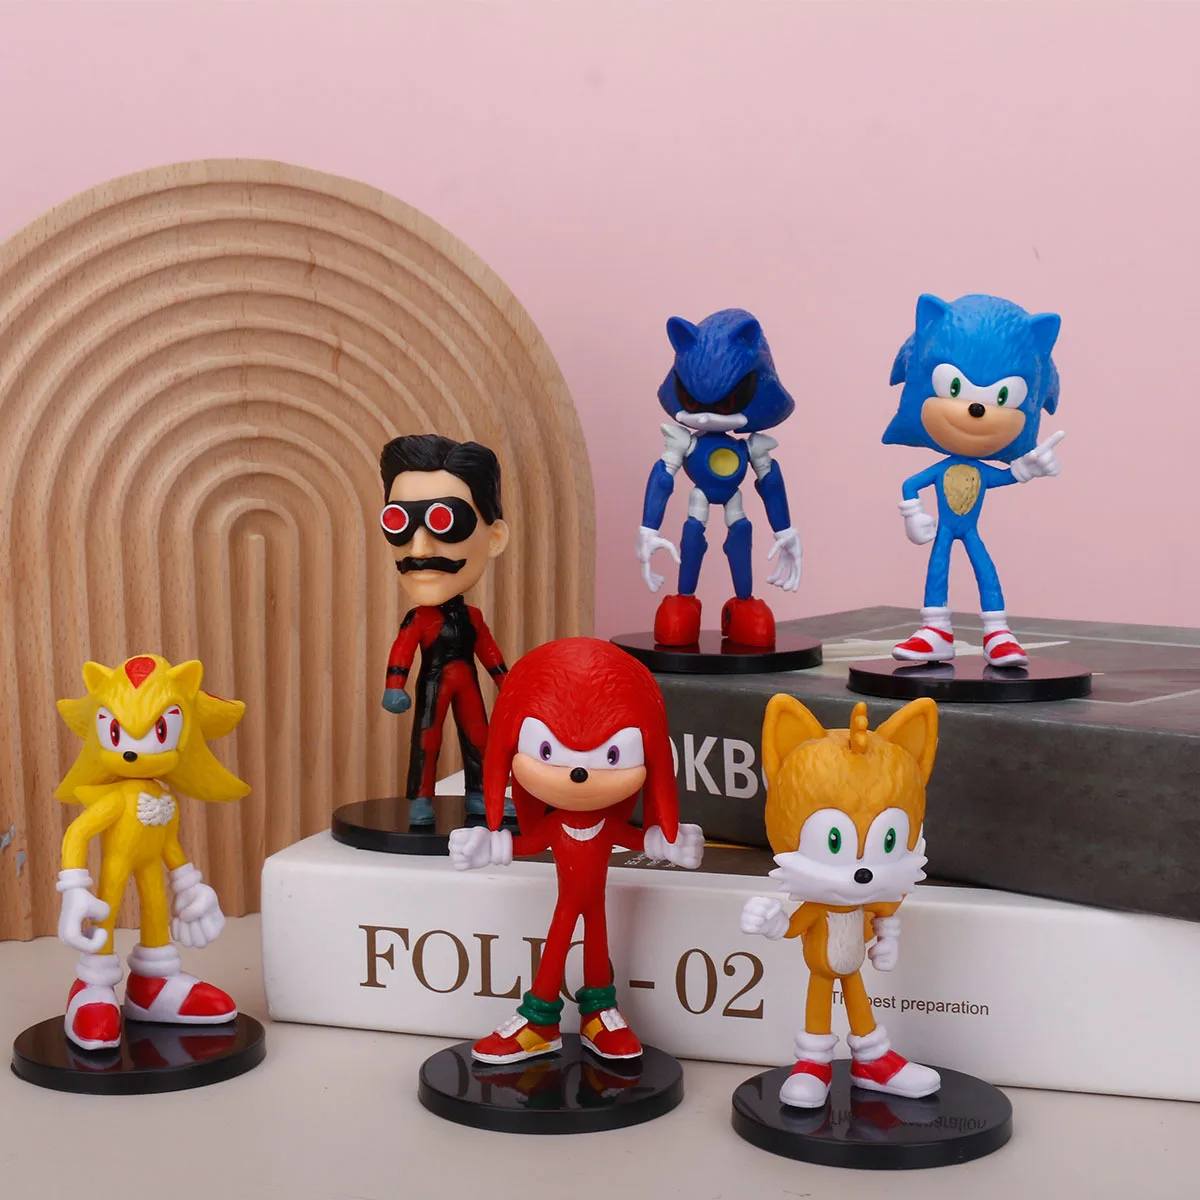 

6Pcs/ Set Sonic The Hedgehog Figure Ornaments Model Pvc Cartoon Miles Prower Knuckles The Echidna Child Gift Toy